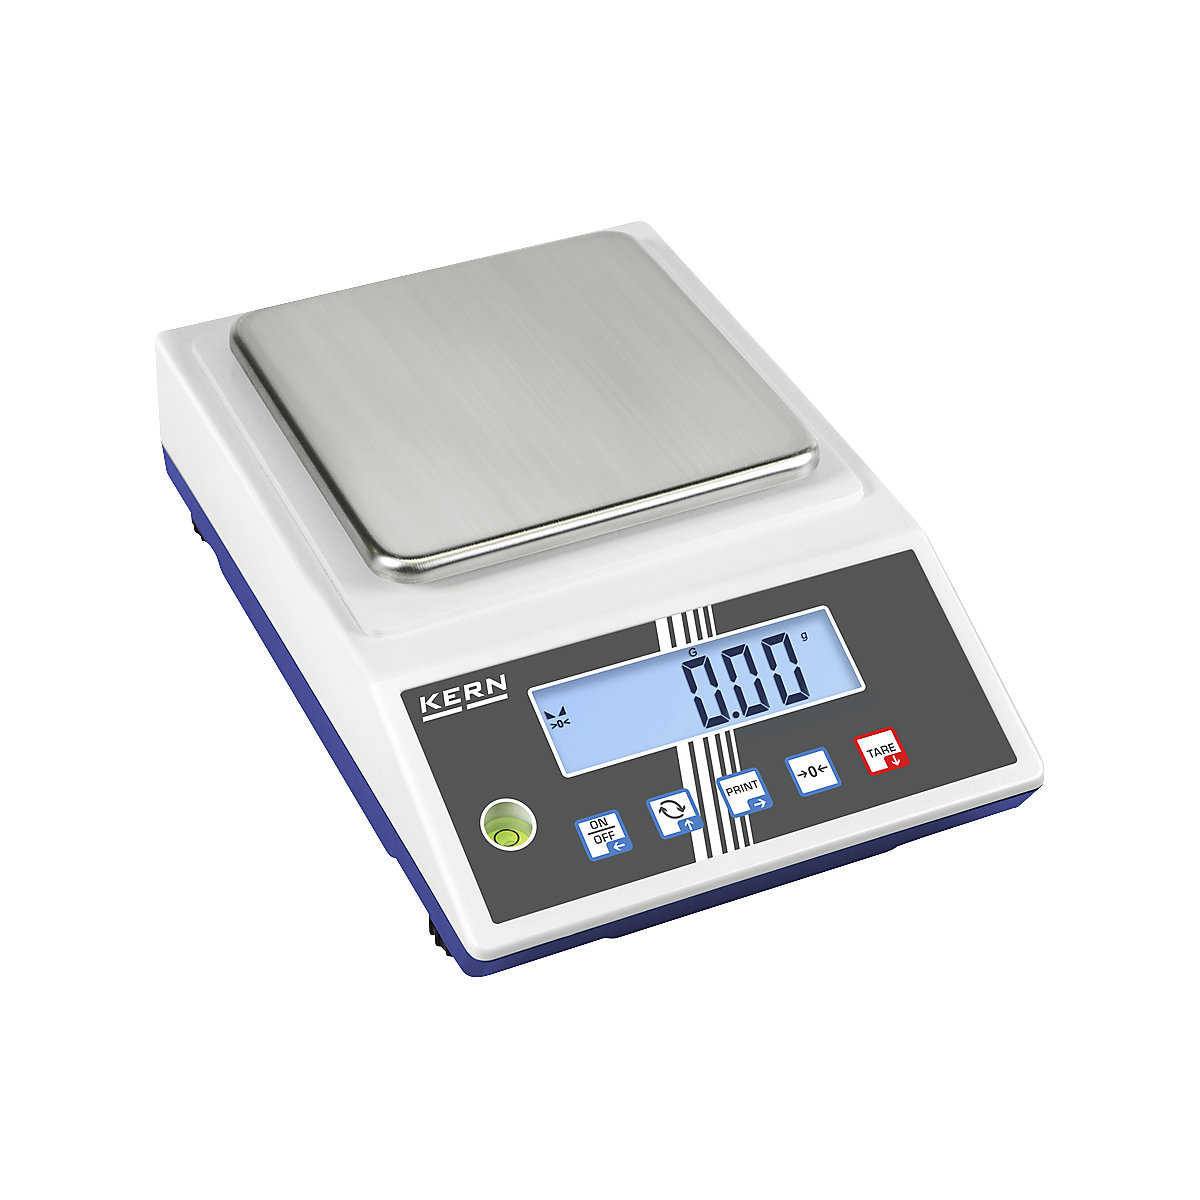 IoT-Line compact laboratory scales, weighing plate 130 x 130 mm, weighing range up to 2 kg, read-out accuracy 0.1 g-1